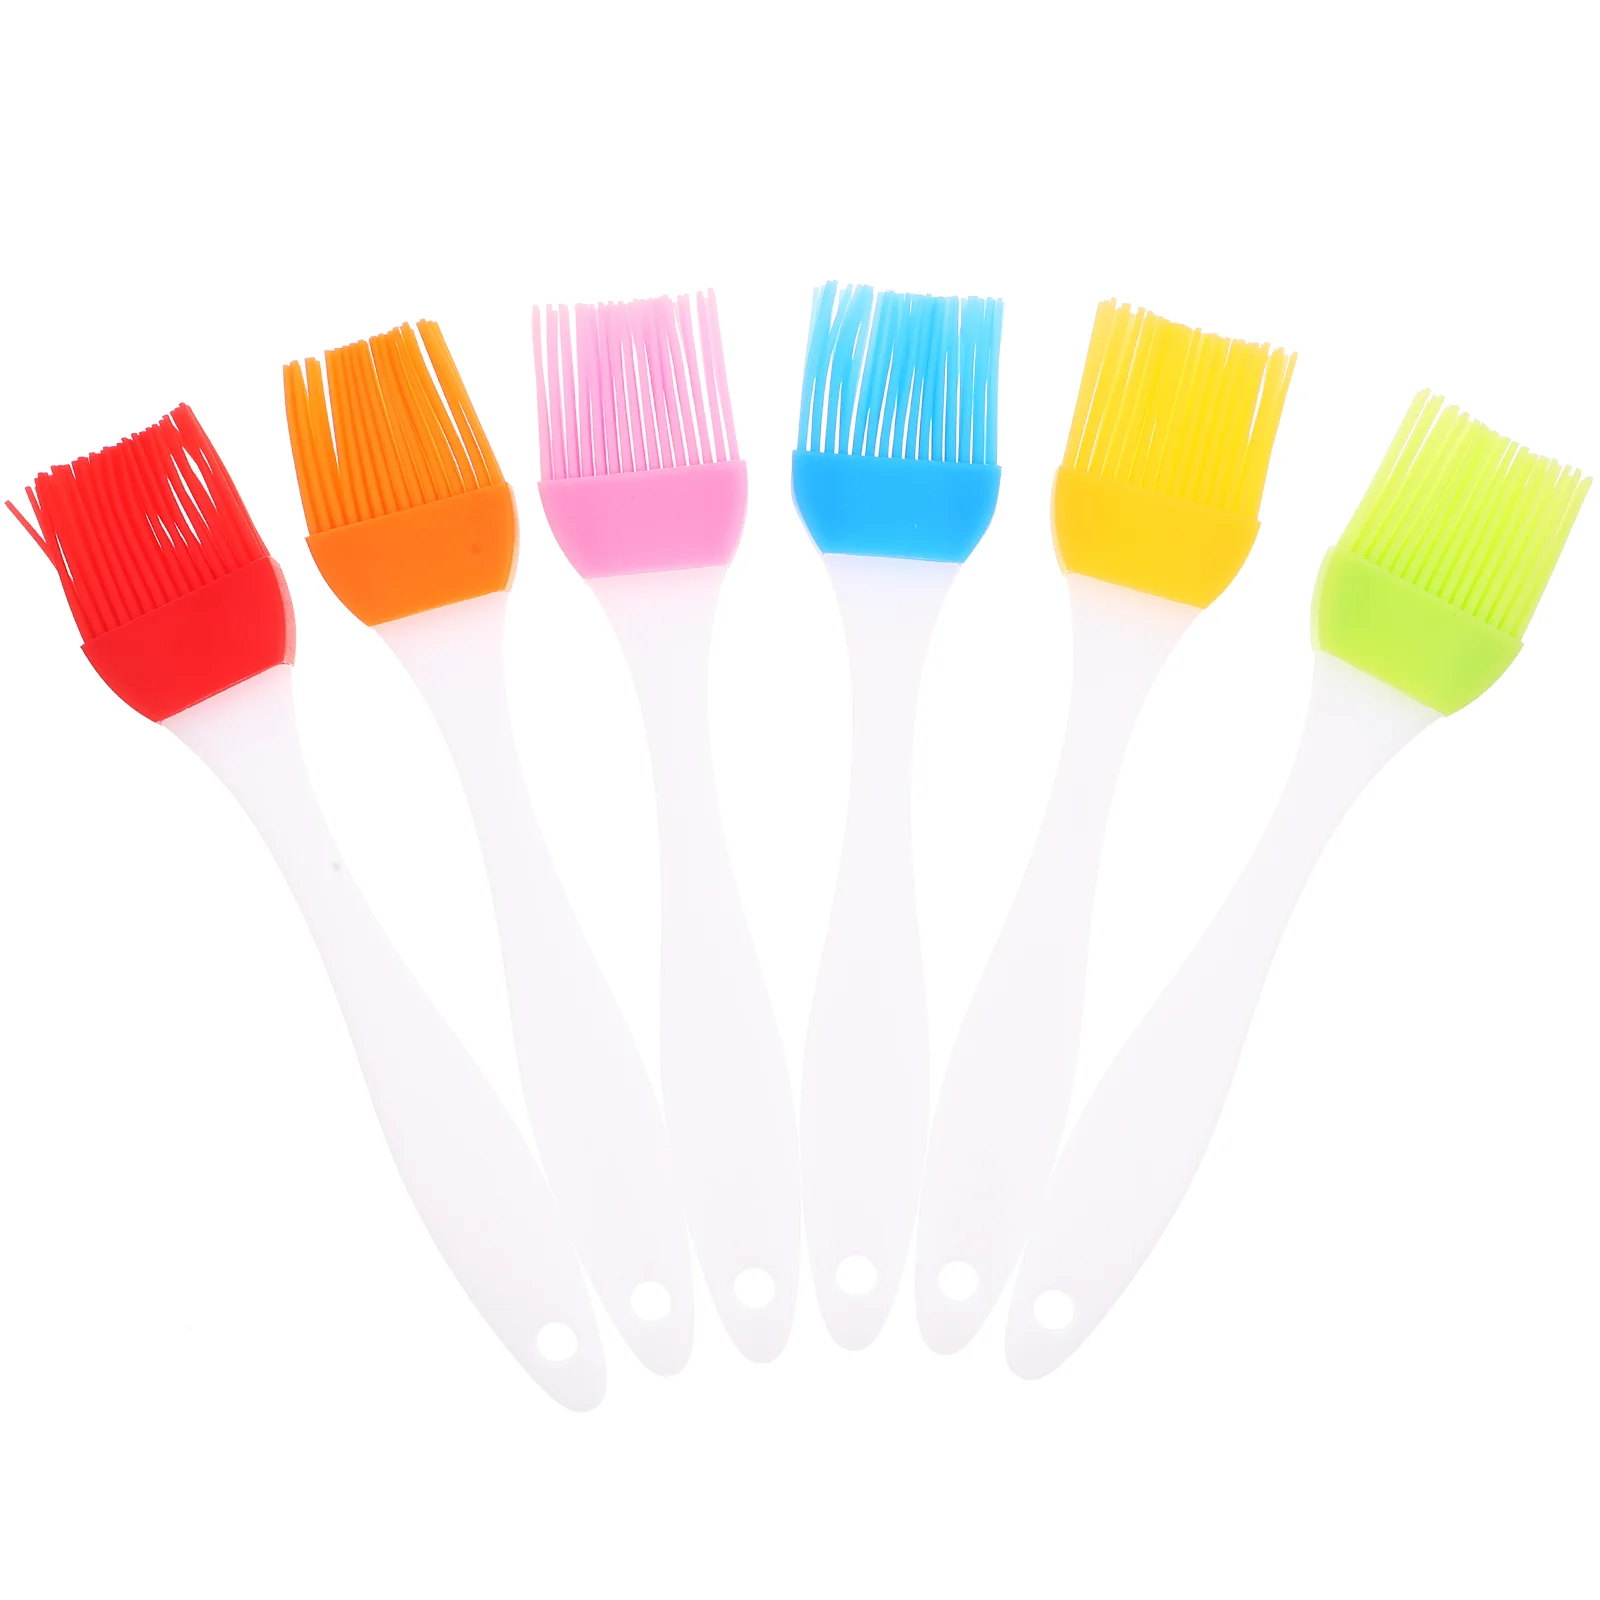 

Brush Silicone Basting Oil Bbq Sauce Cookingbarbecue Brushes Baking Kitchen Meat Grilling Butter Pastry Marinadegrill Cake Tool